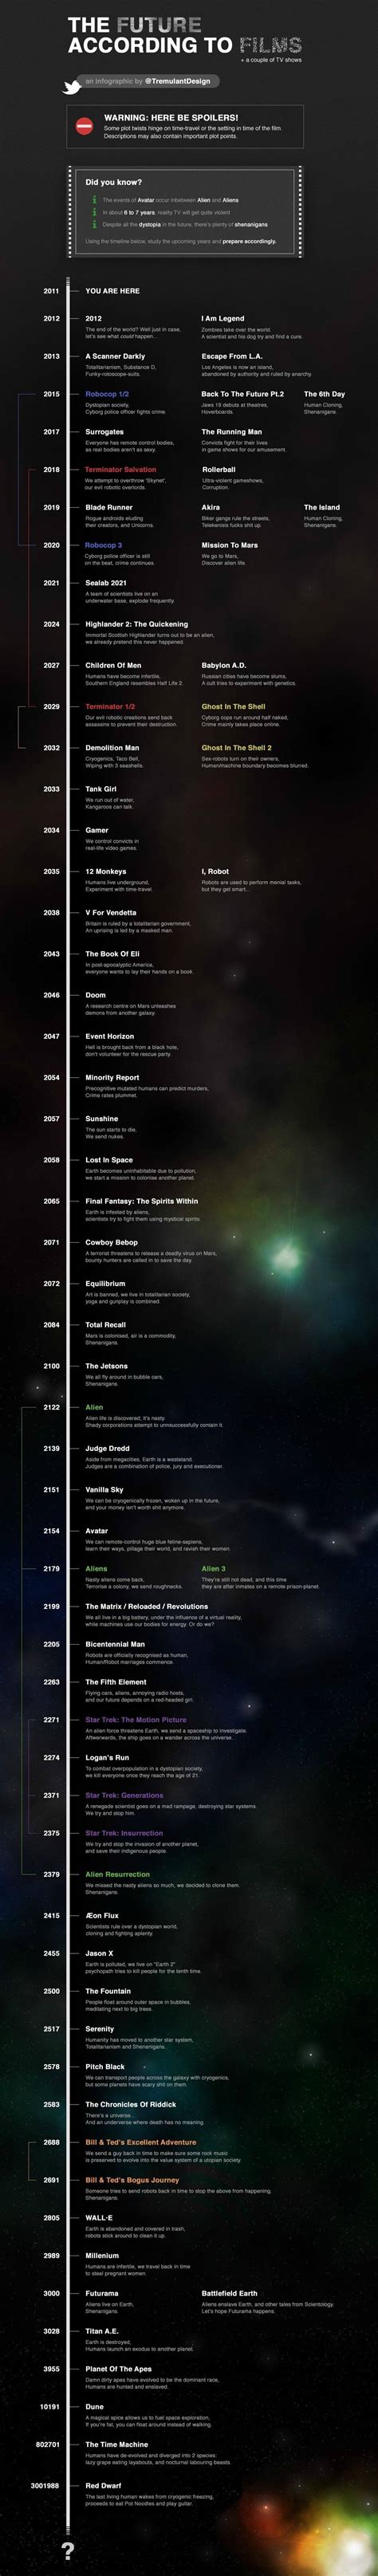 The Future According To Films Imgur